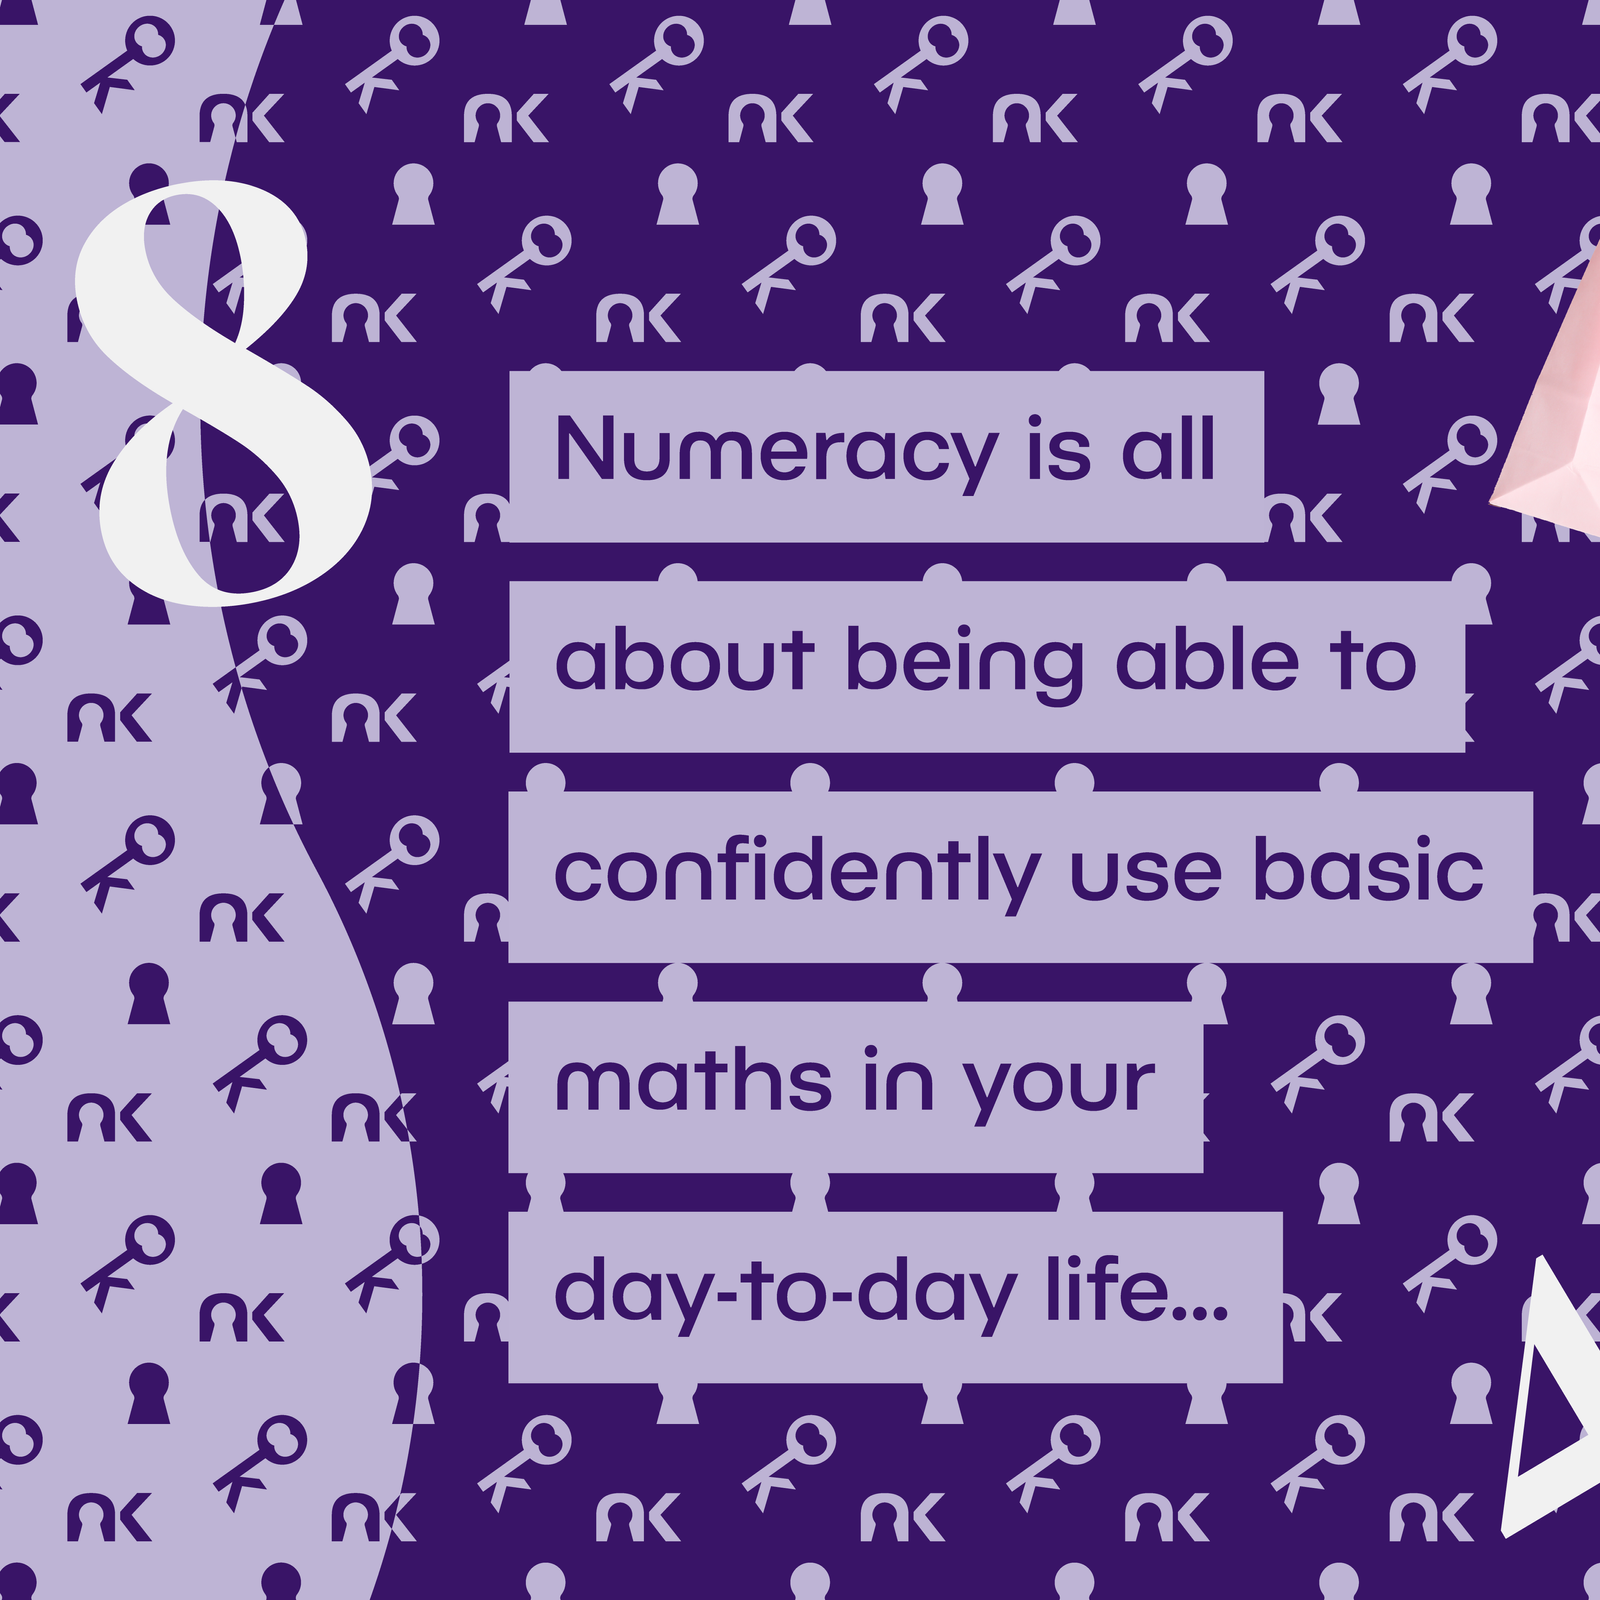 Text says: "Numeracy is all about being able to confidently use basic maths in your day-to-day life..." next to a white hand carrying pink paper shopping bags.